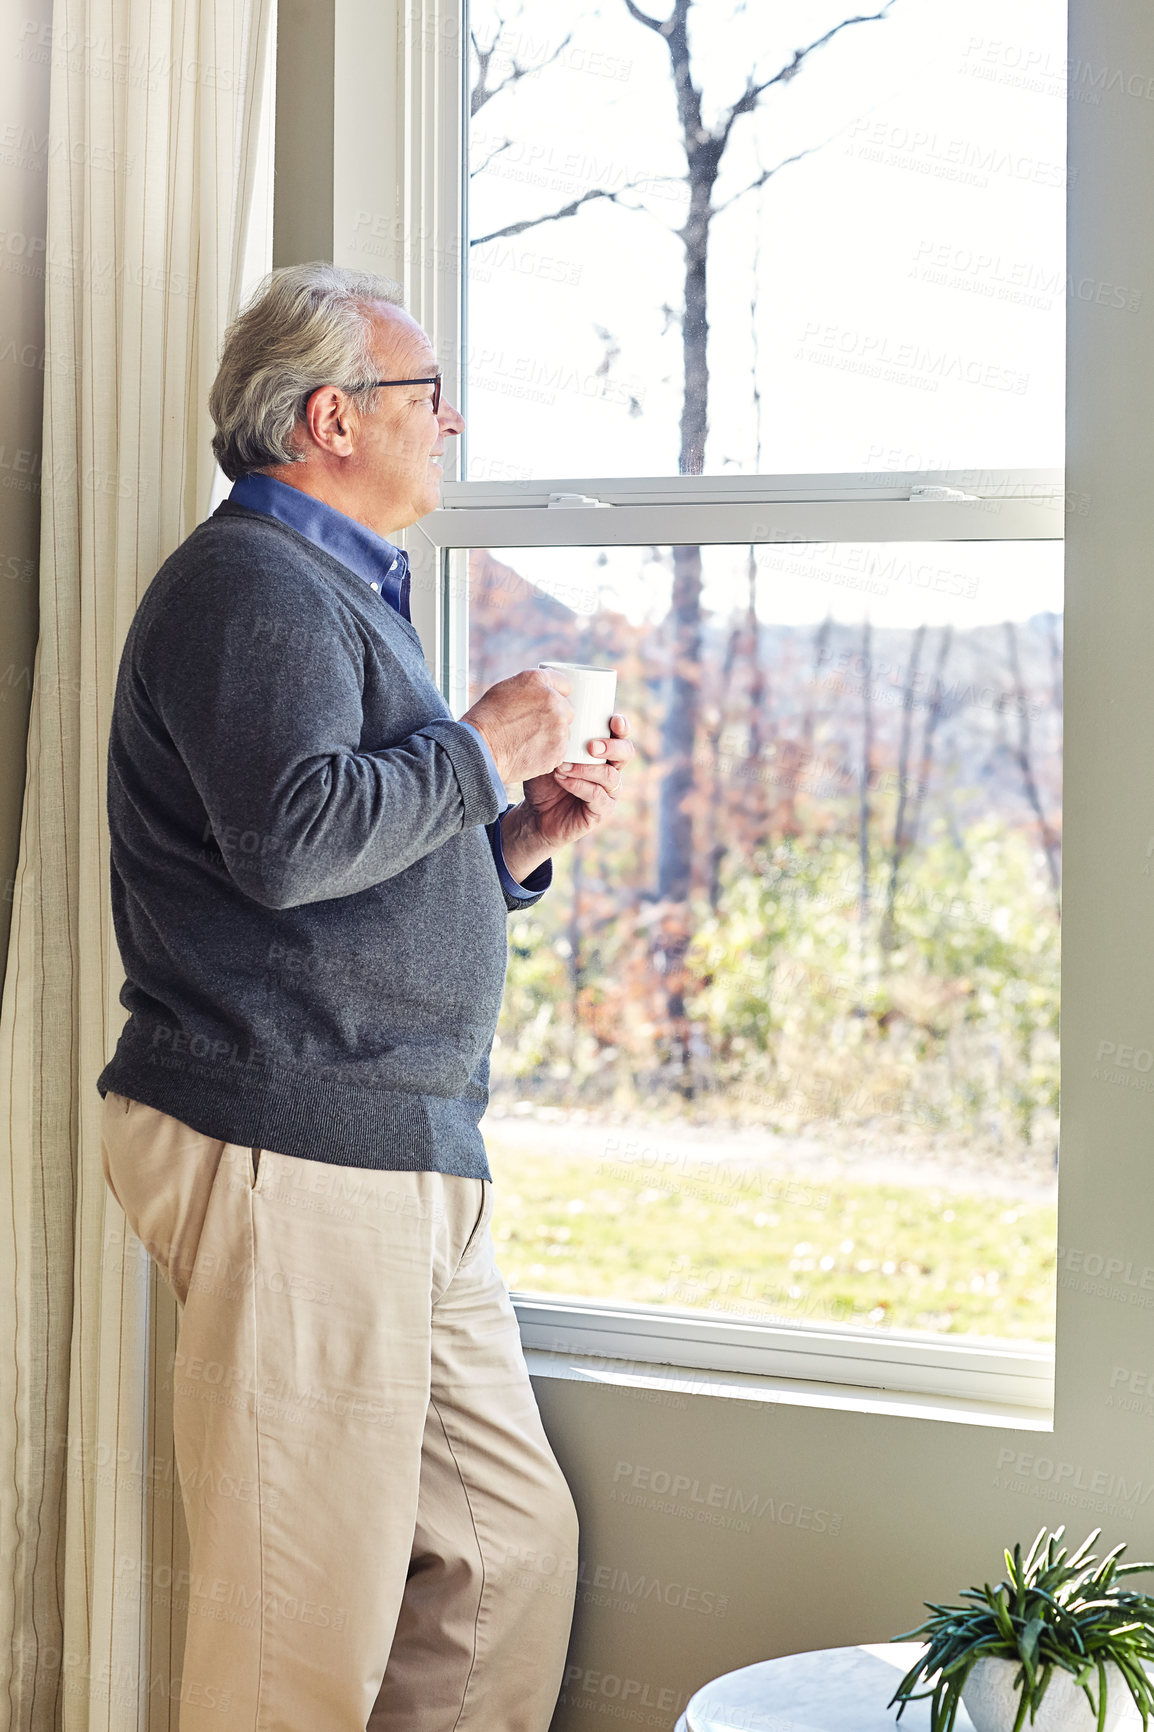 Buy stock photo Cropped shot of a senior man relaxing at home